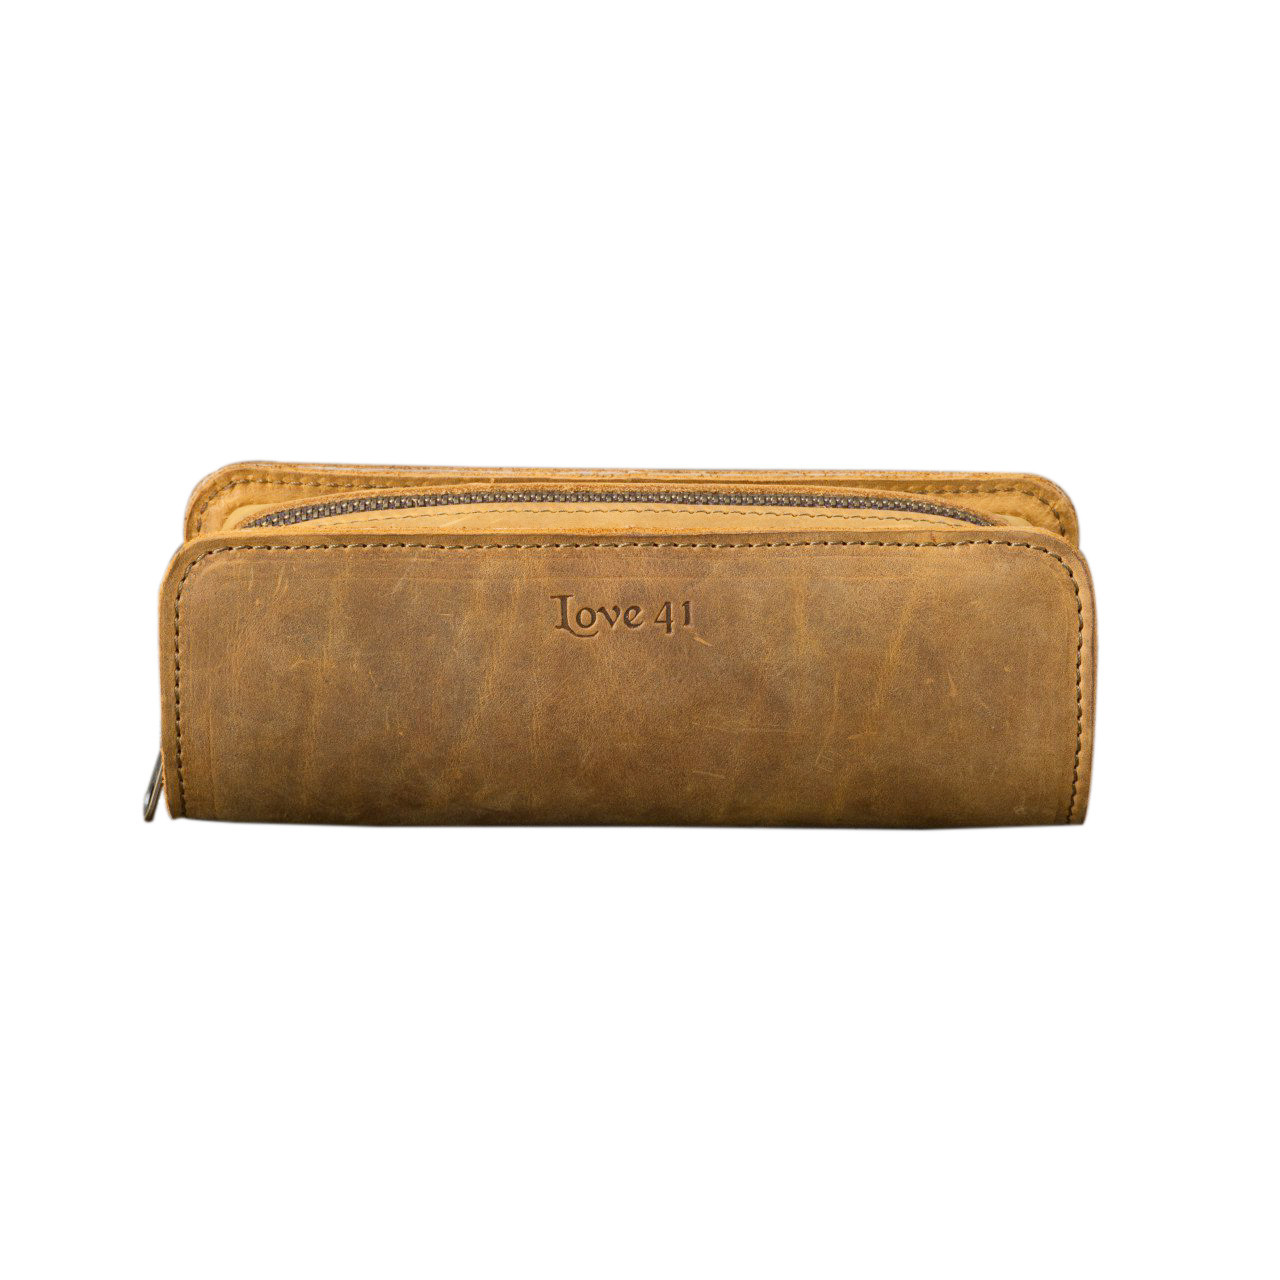 Leather Pouch for Pens in Tan